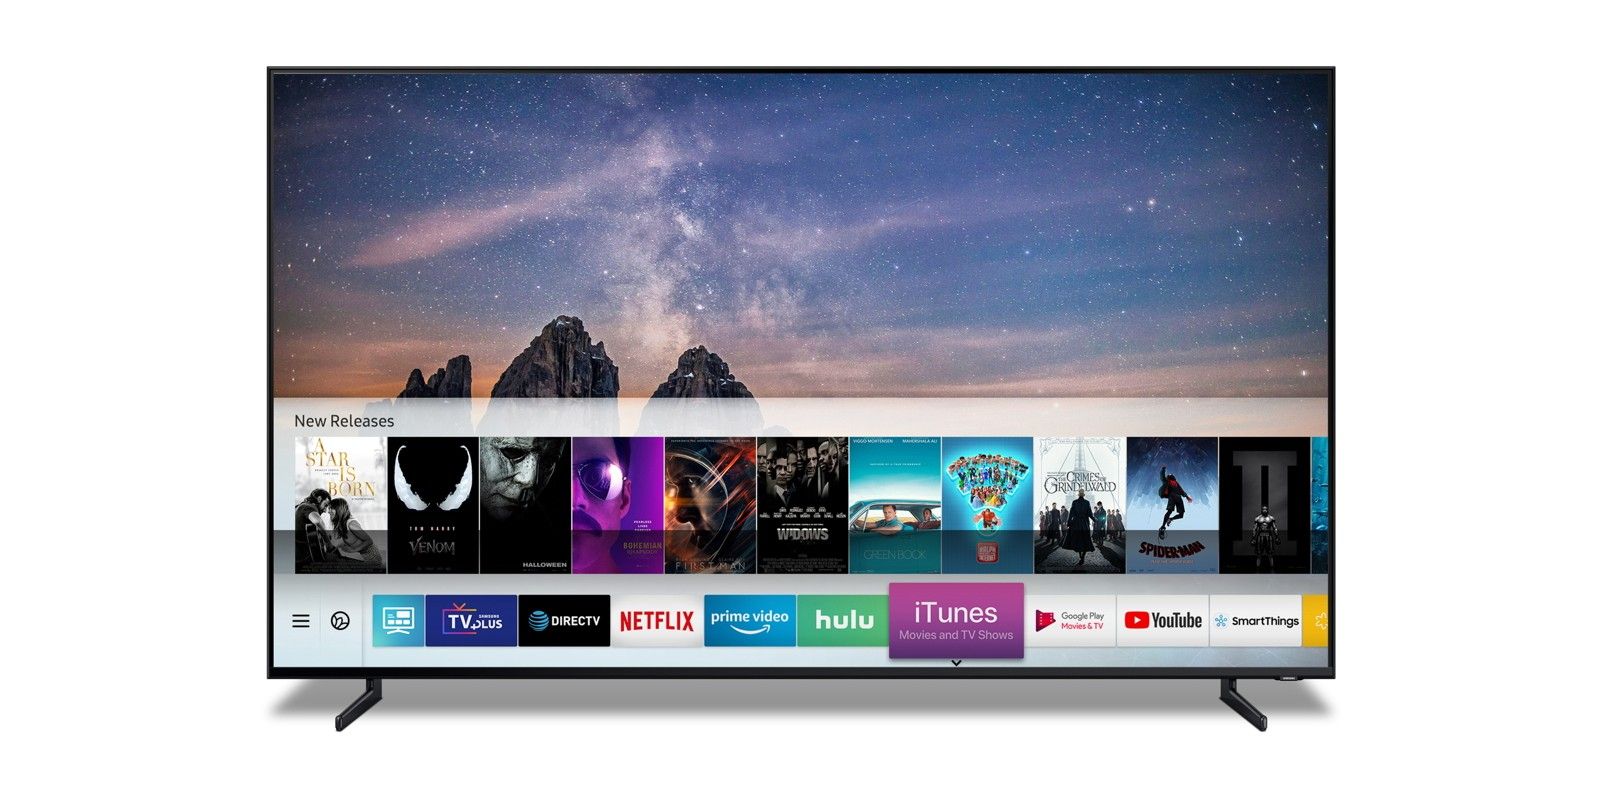 Samsung TVs don't come with Paramount Plus pre-installed